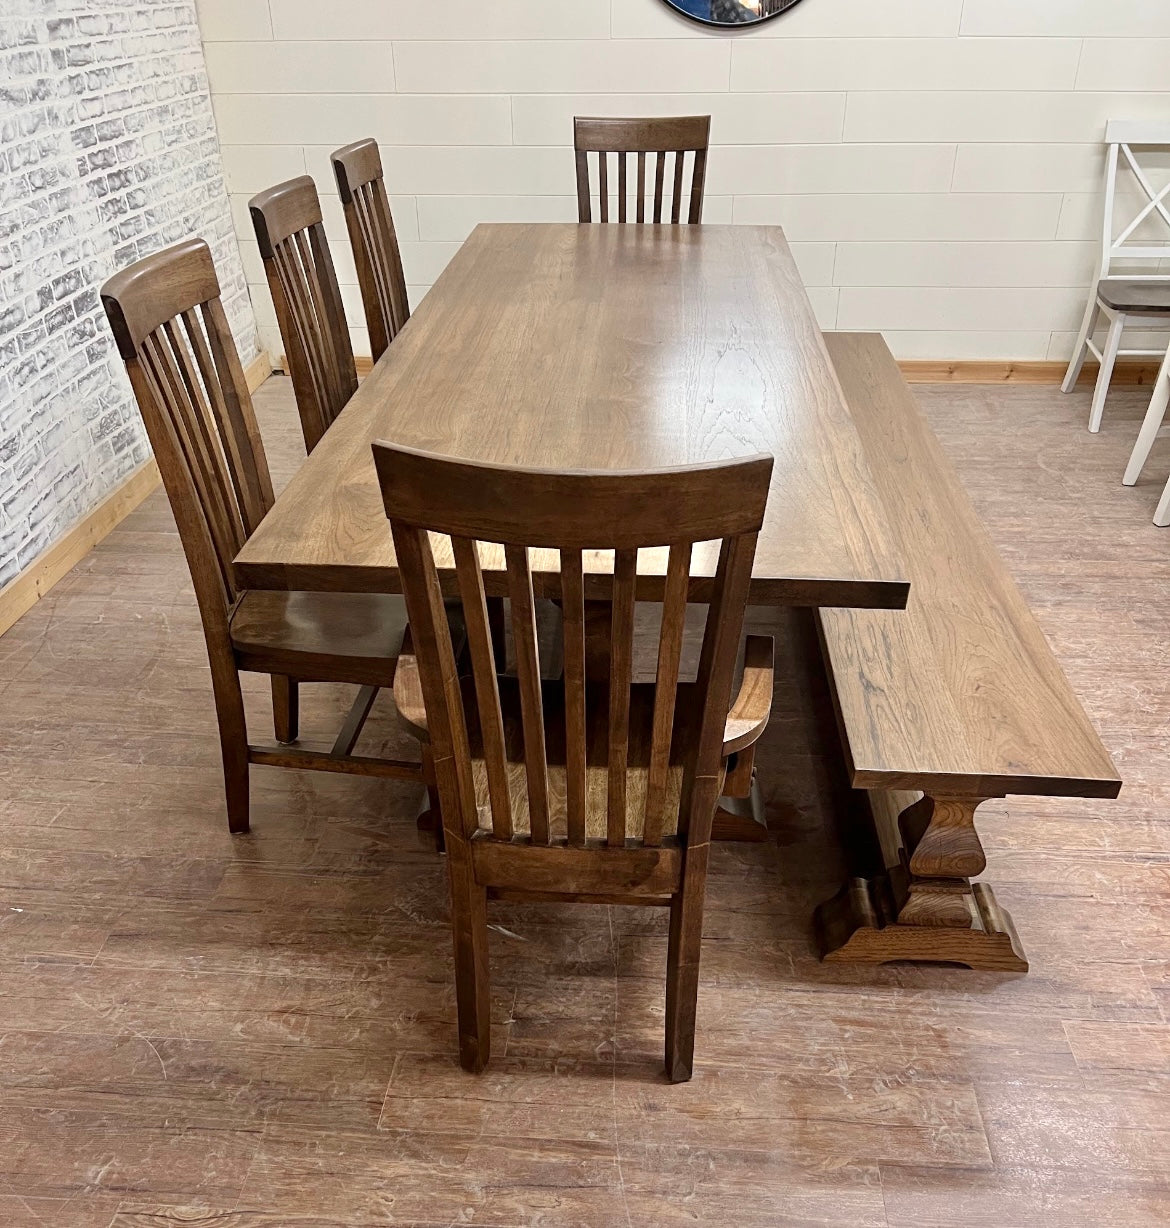 Pictured with an 8' L x 36" W Solid Hickory table with Espresso stain. Pictured with a Matching Bench and 5 Mission Dining Chairs.